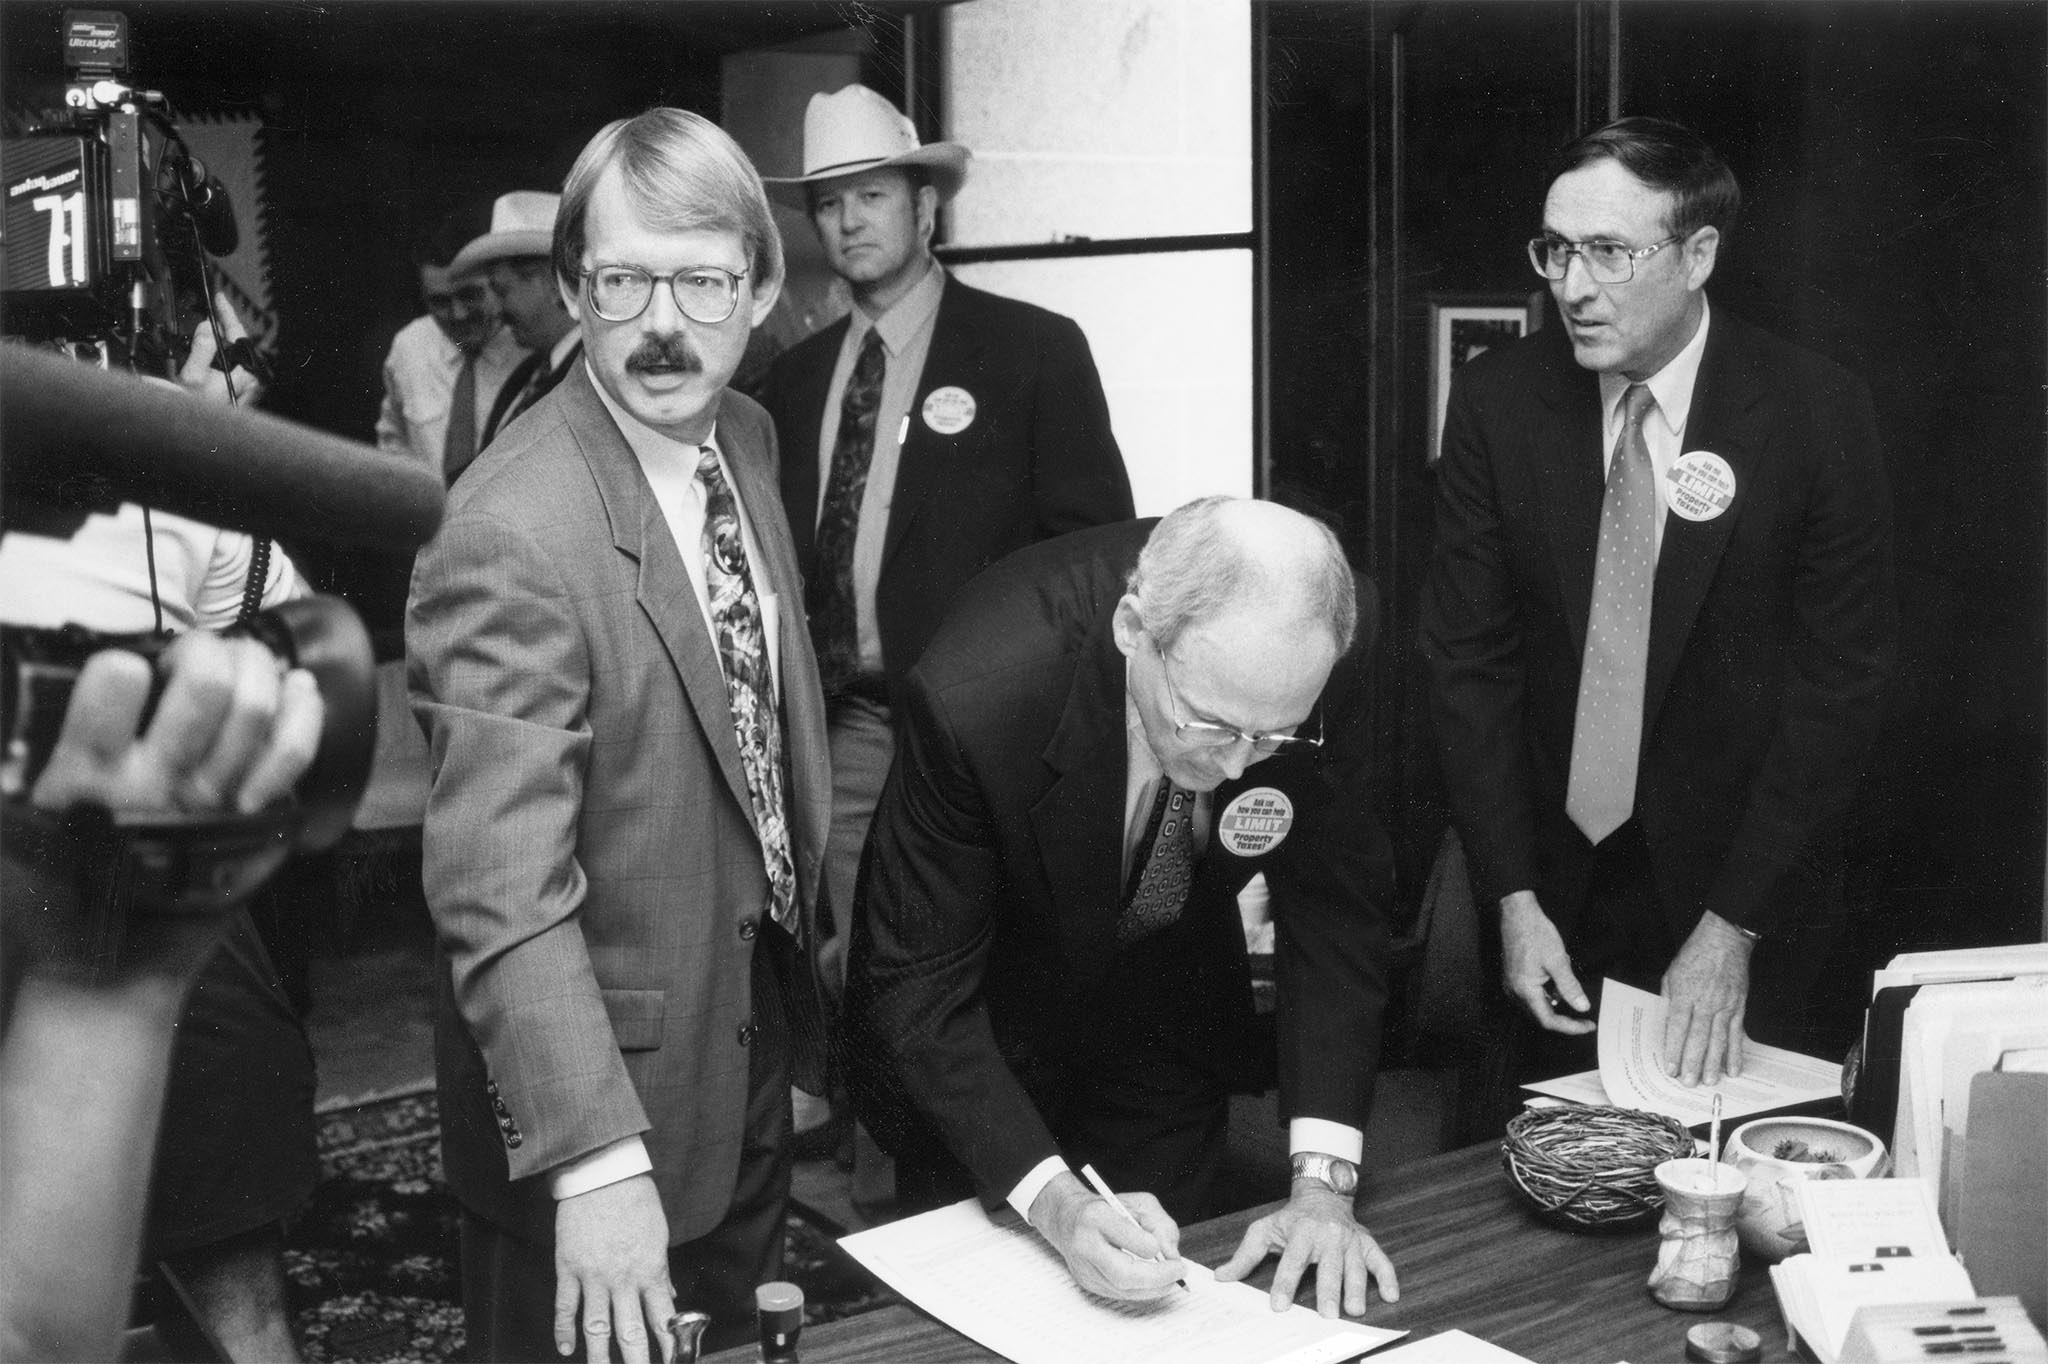 In 1994, Oklahoma Farm Bureau President Eldon Merklin attracted media coverage as he became the first person to sign a petition that would give taxpayers control over ad valorem tax levels. OKFB was part of a coalition that supported placing the Property Owners Protection Act on the ballot. Later, petitions were signed at county Farm Bureau offices. Also pictured at the signing event was Oklahoma Taxpayers Union President Dan Brown, OKFB Board Member Joe Mayer and coalition spokesman Jim Williams.